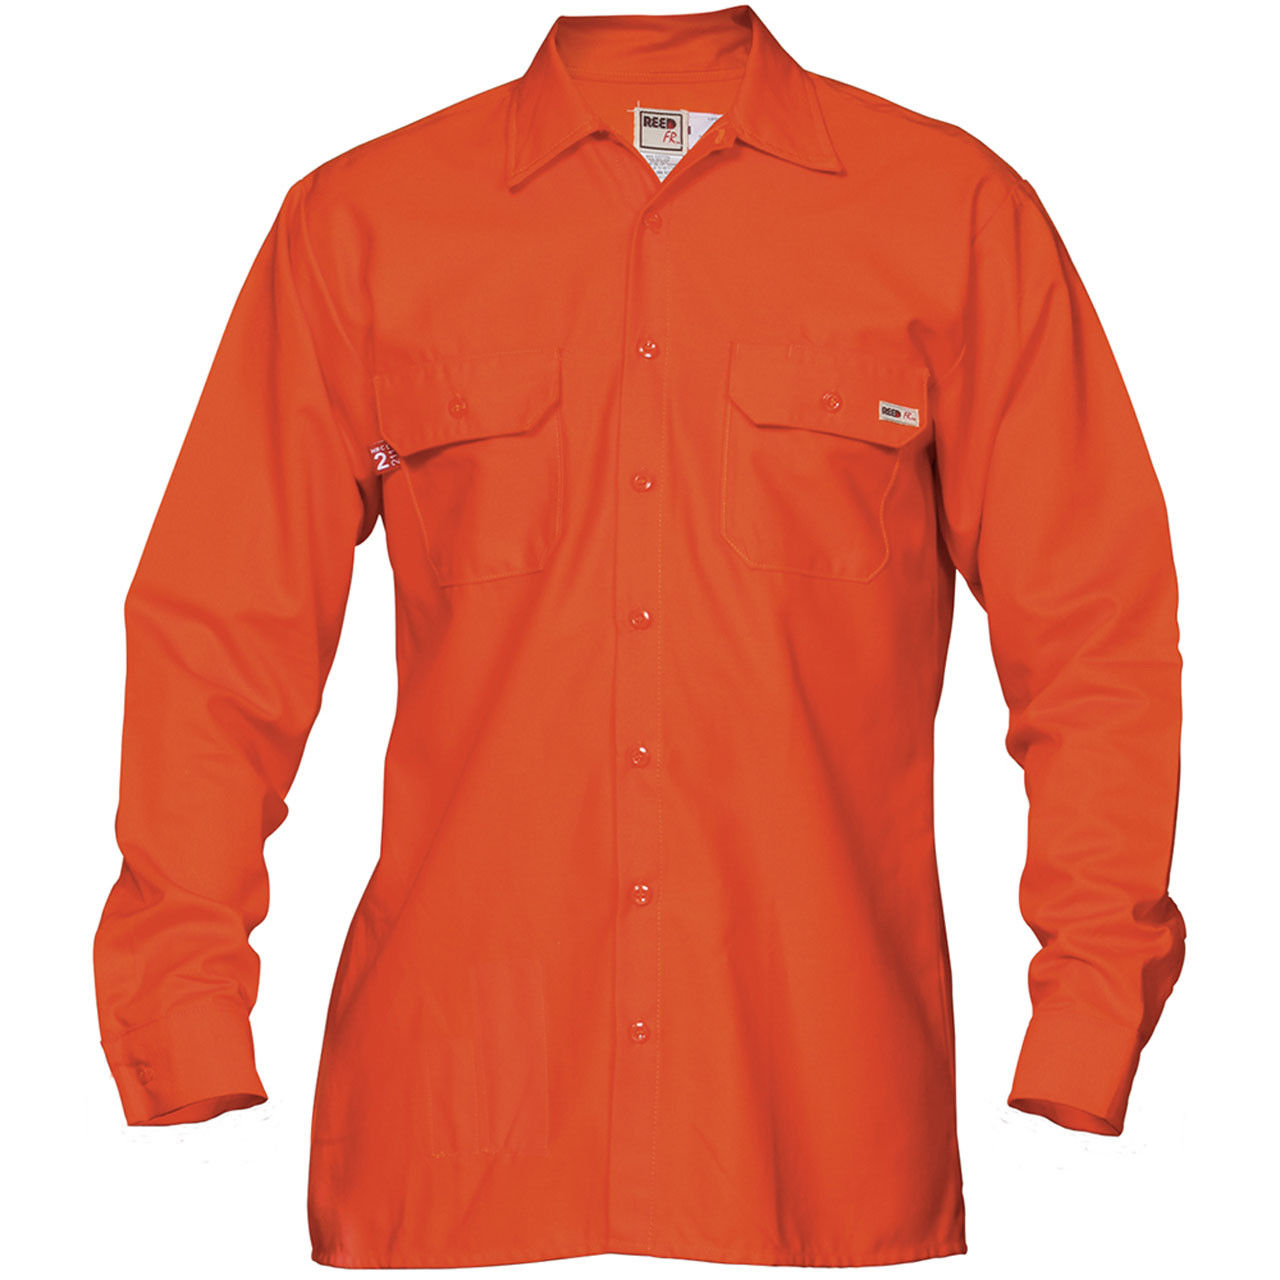 What material is used in the construction of these work shirts?